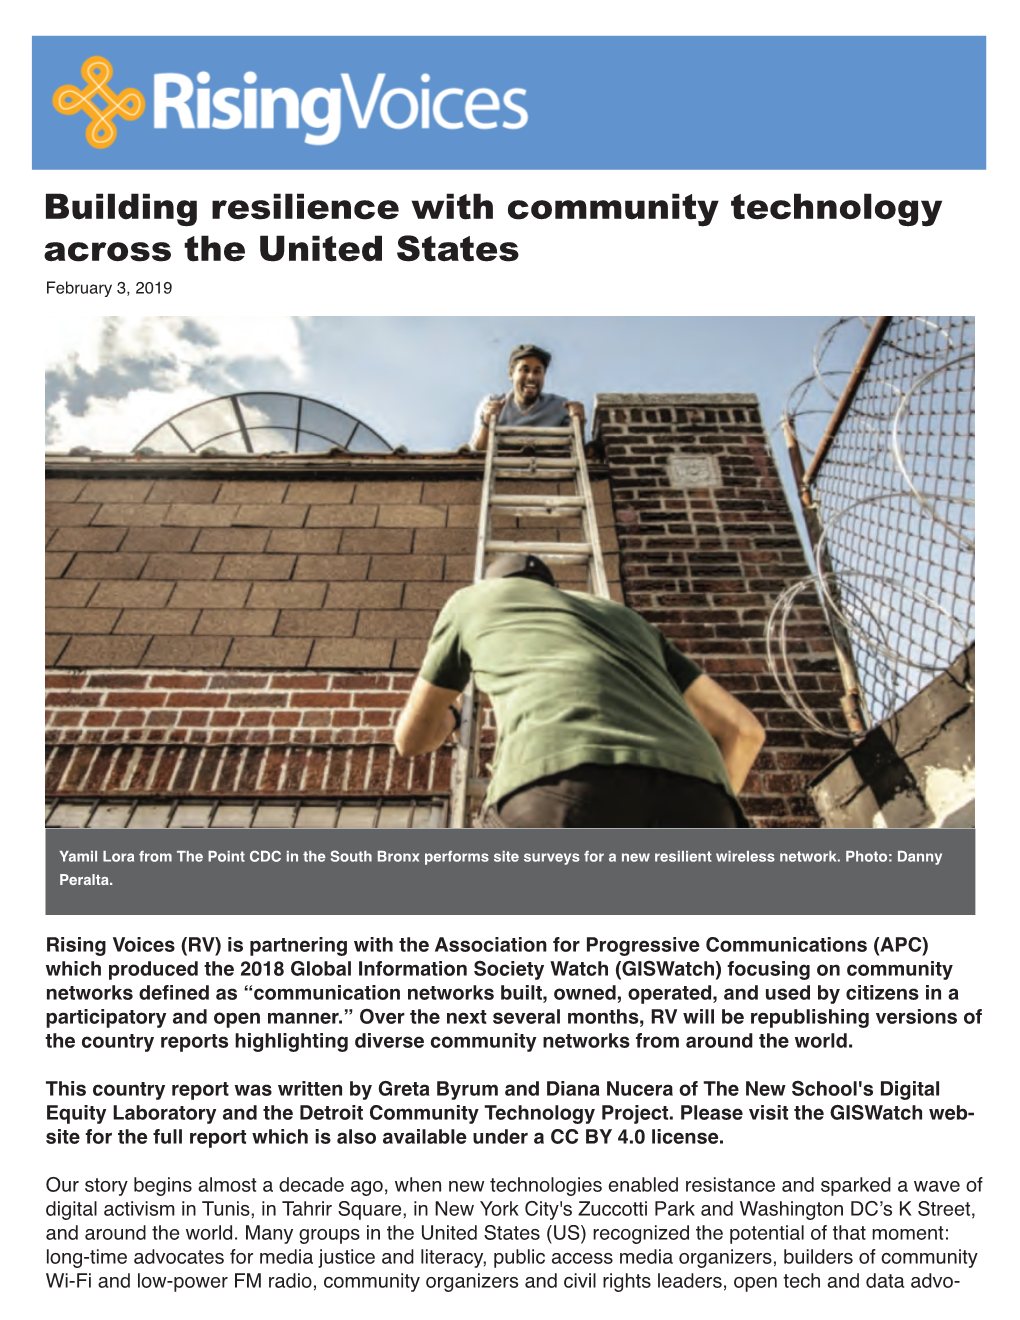 Building Resilience with Community Technology Across the United States February 3, 2019